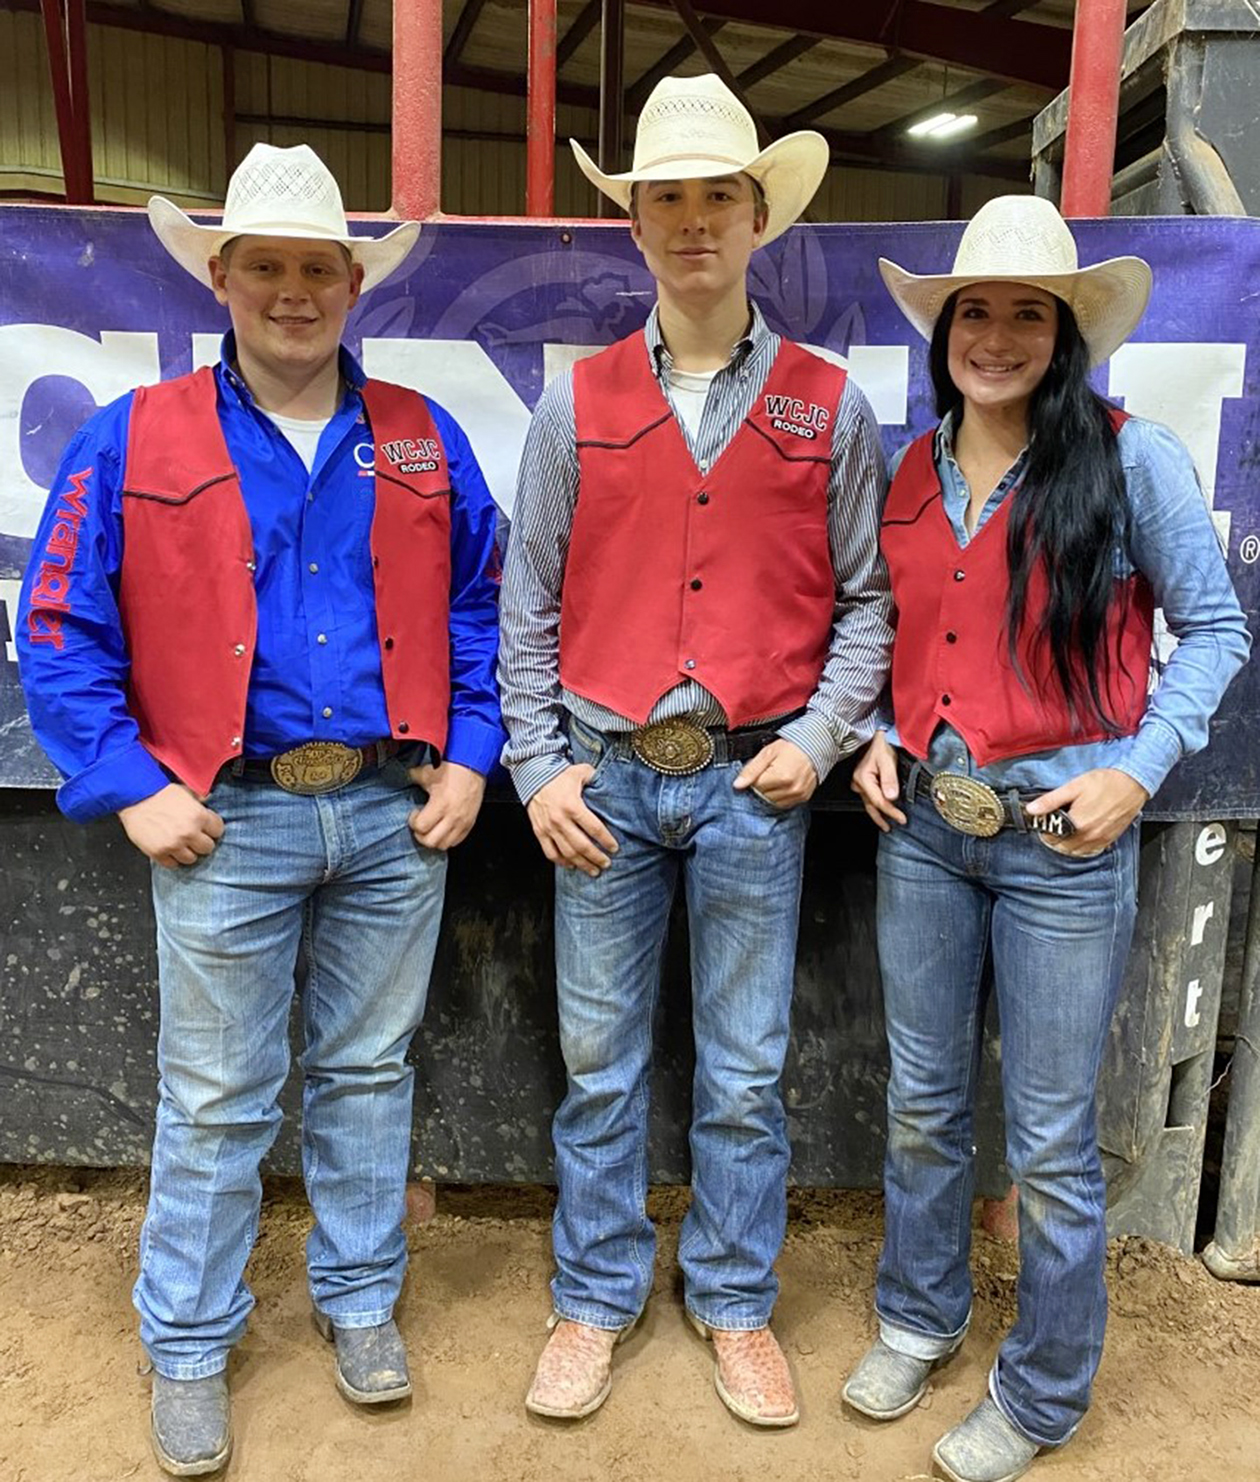 NATIONAL FINALS BOUND - WCJC rodeo team members earn trip to College National Finals Rodeo